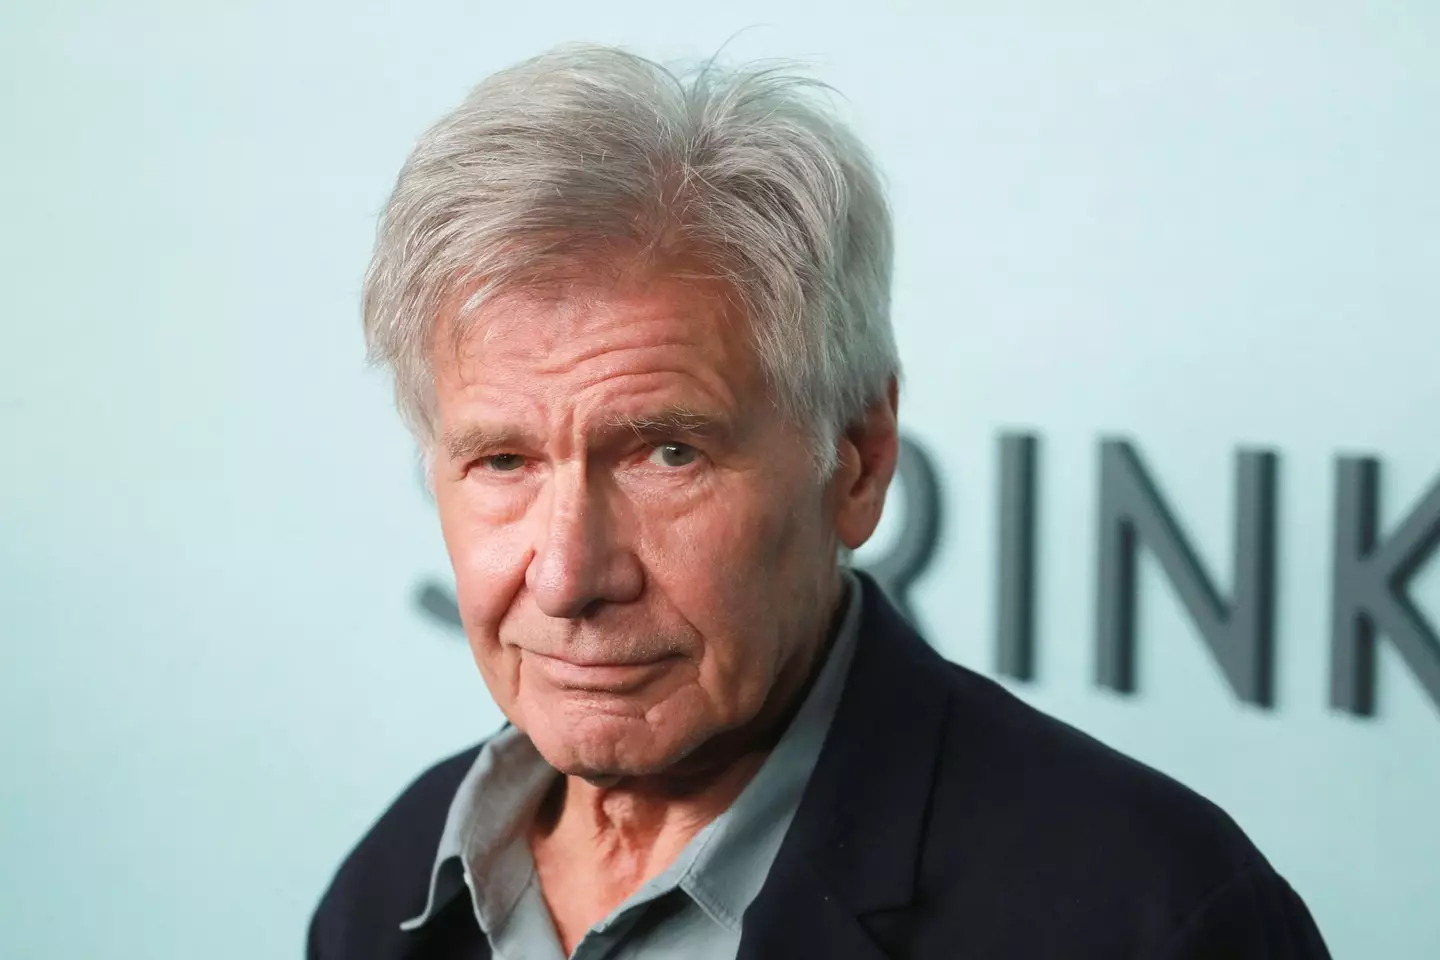 Harrison Ford at the premiere of Shrinking.